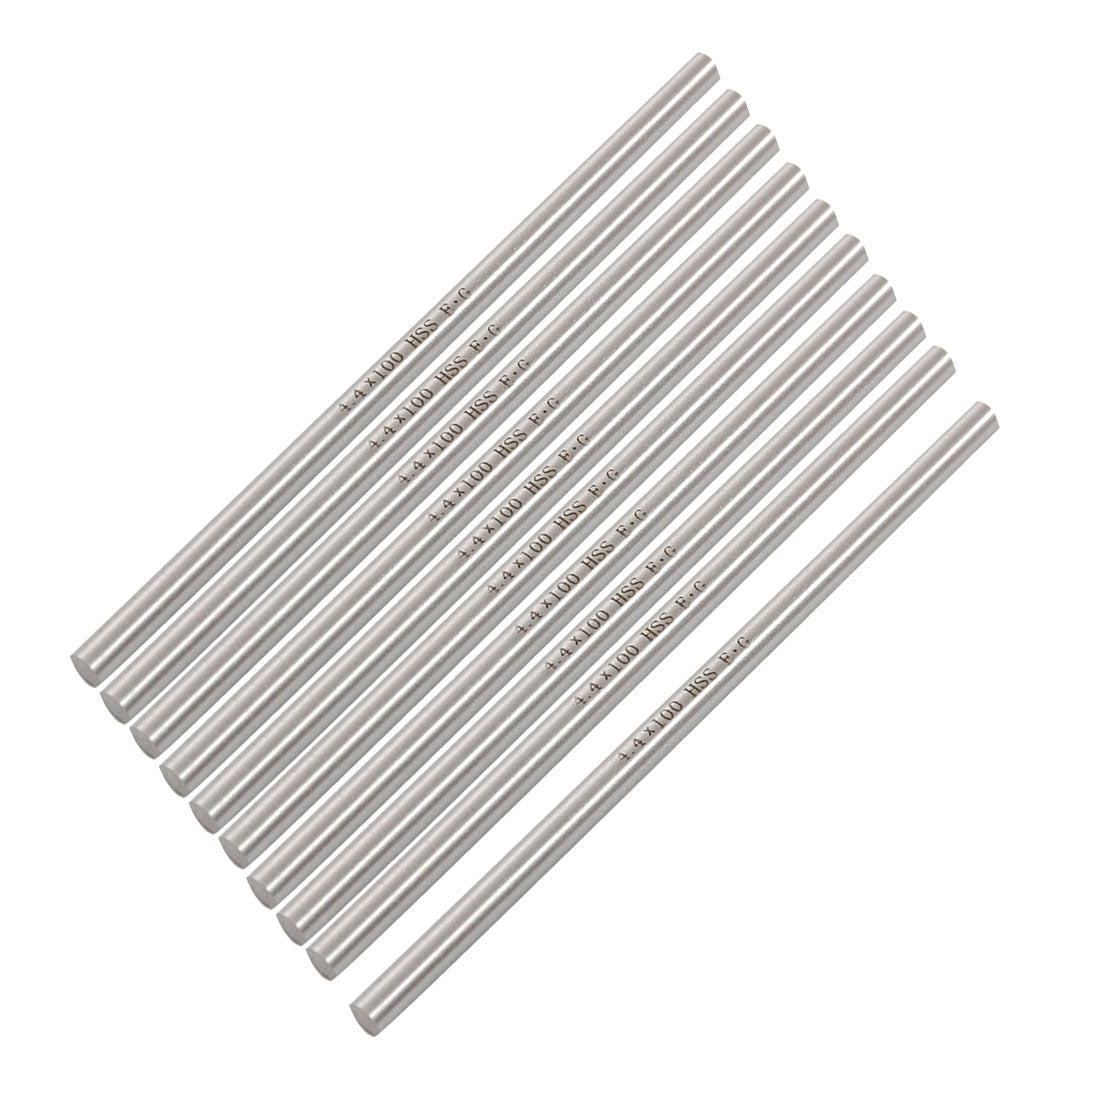 Uxcell Uxcell 10 Pcs HSS High Speed Steel Round Turning Lathe Bars 2mm x 200mm